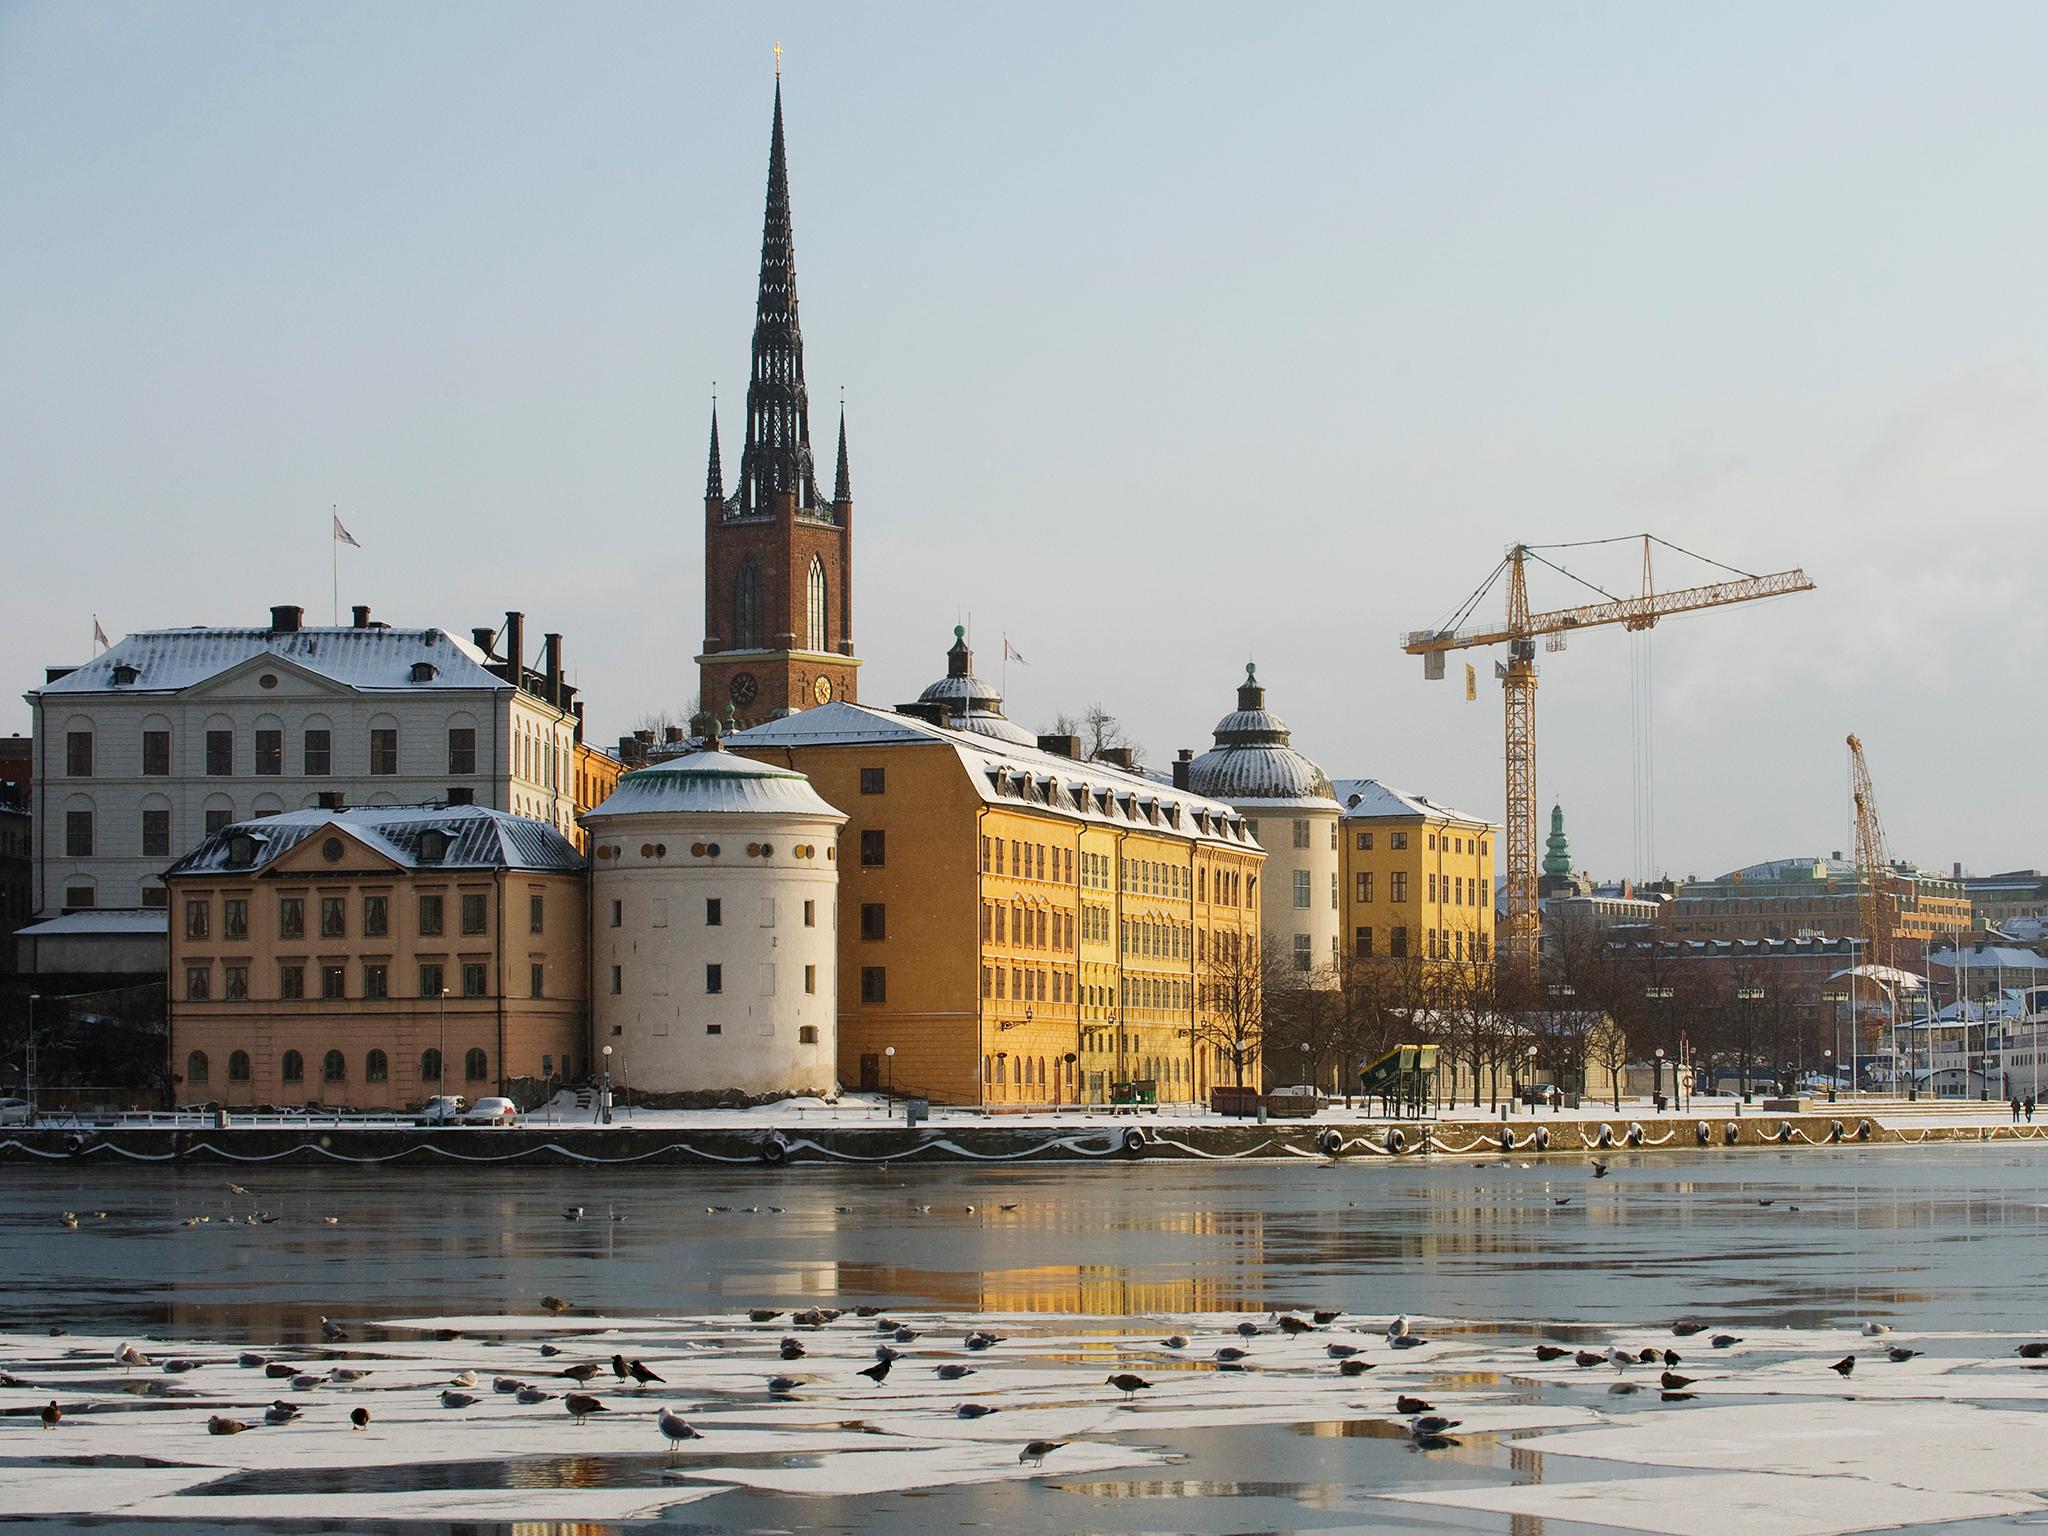 While it has long punched above its weight in the startup world, Sweden risks losing its new businesses